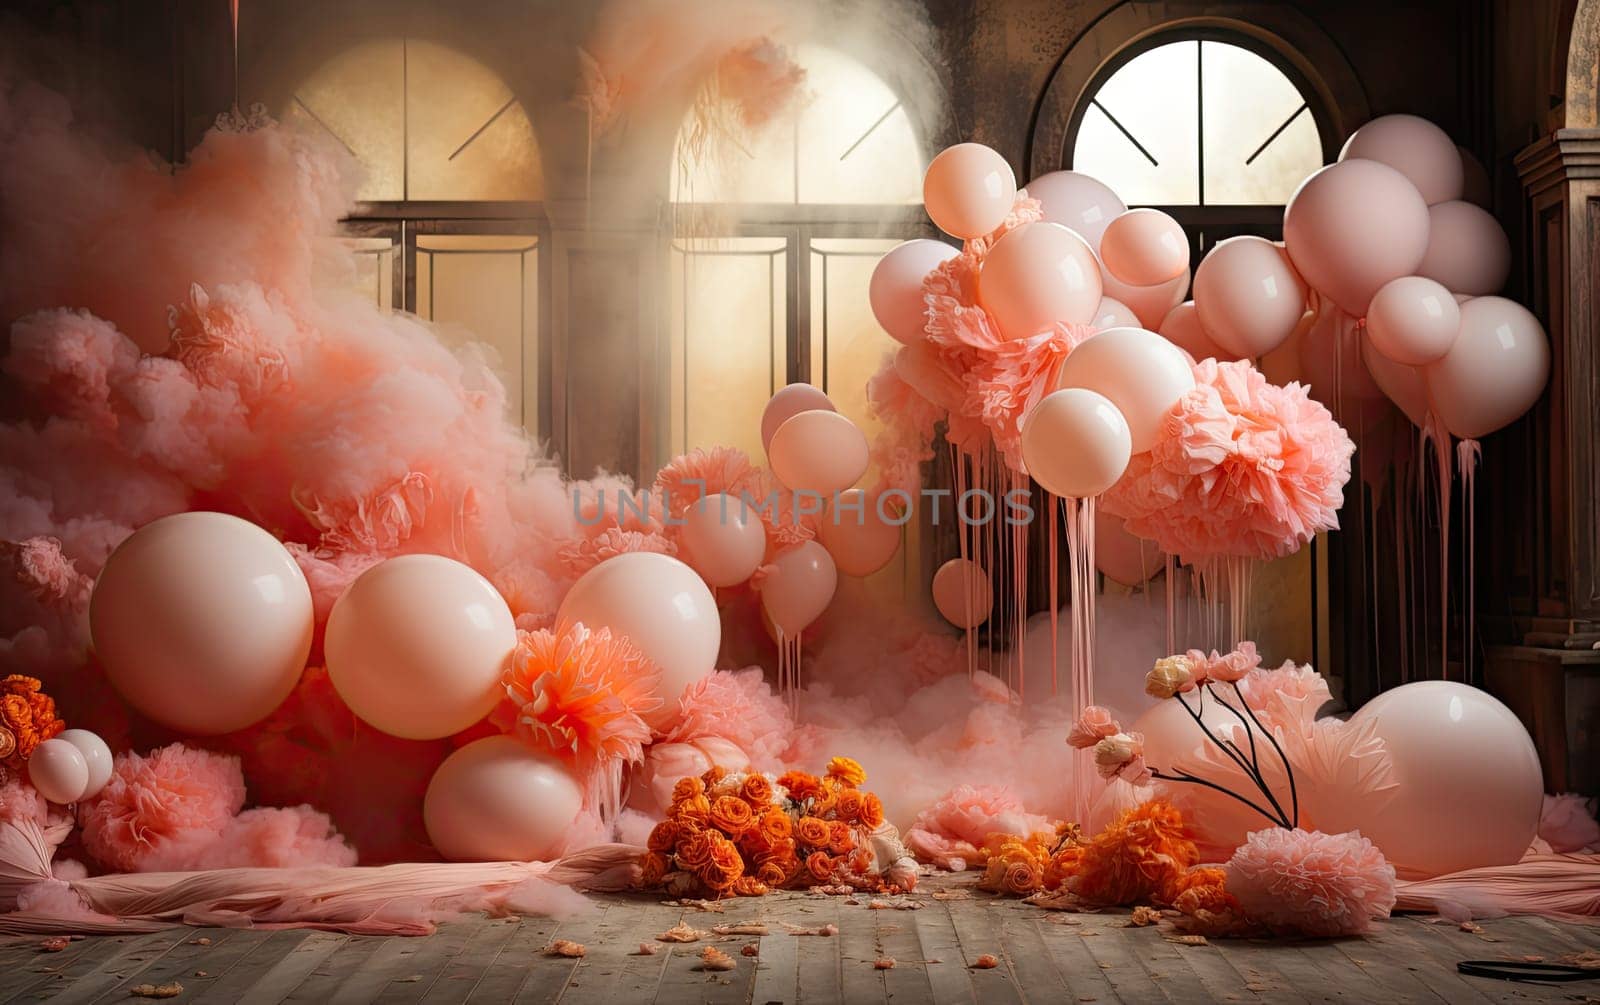 Maternity background or elegant wedding backdrop Mansion hall ballroom interior with pink flower decorations and balloons. by jbruiz78